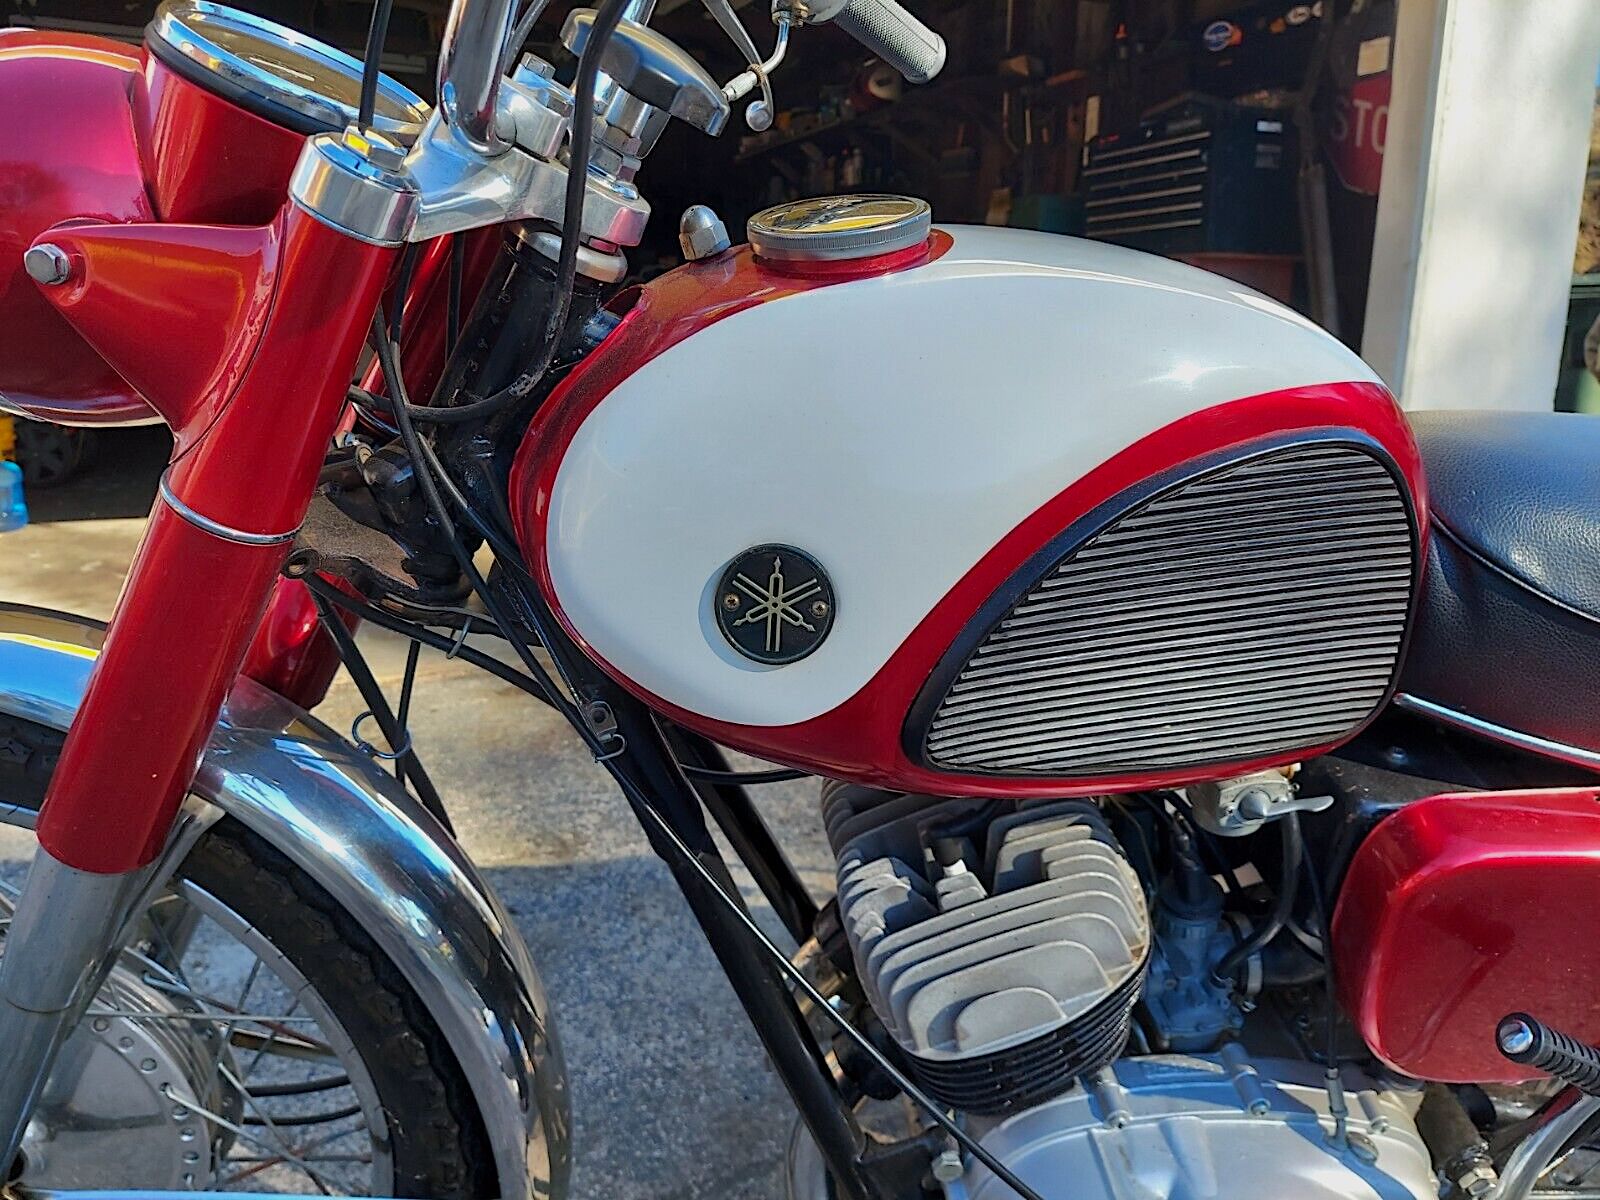 Yamaha Motorcycles Started in the US With This Two-Stroke Gem - eBay Motors  Blog